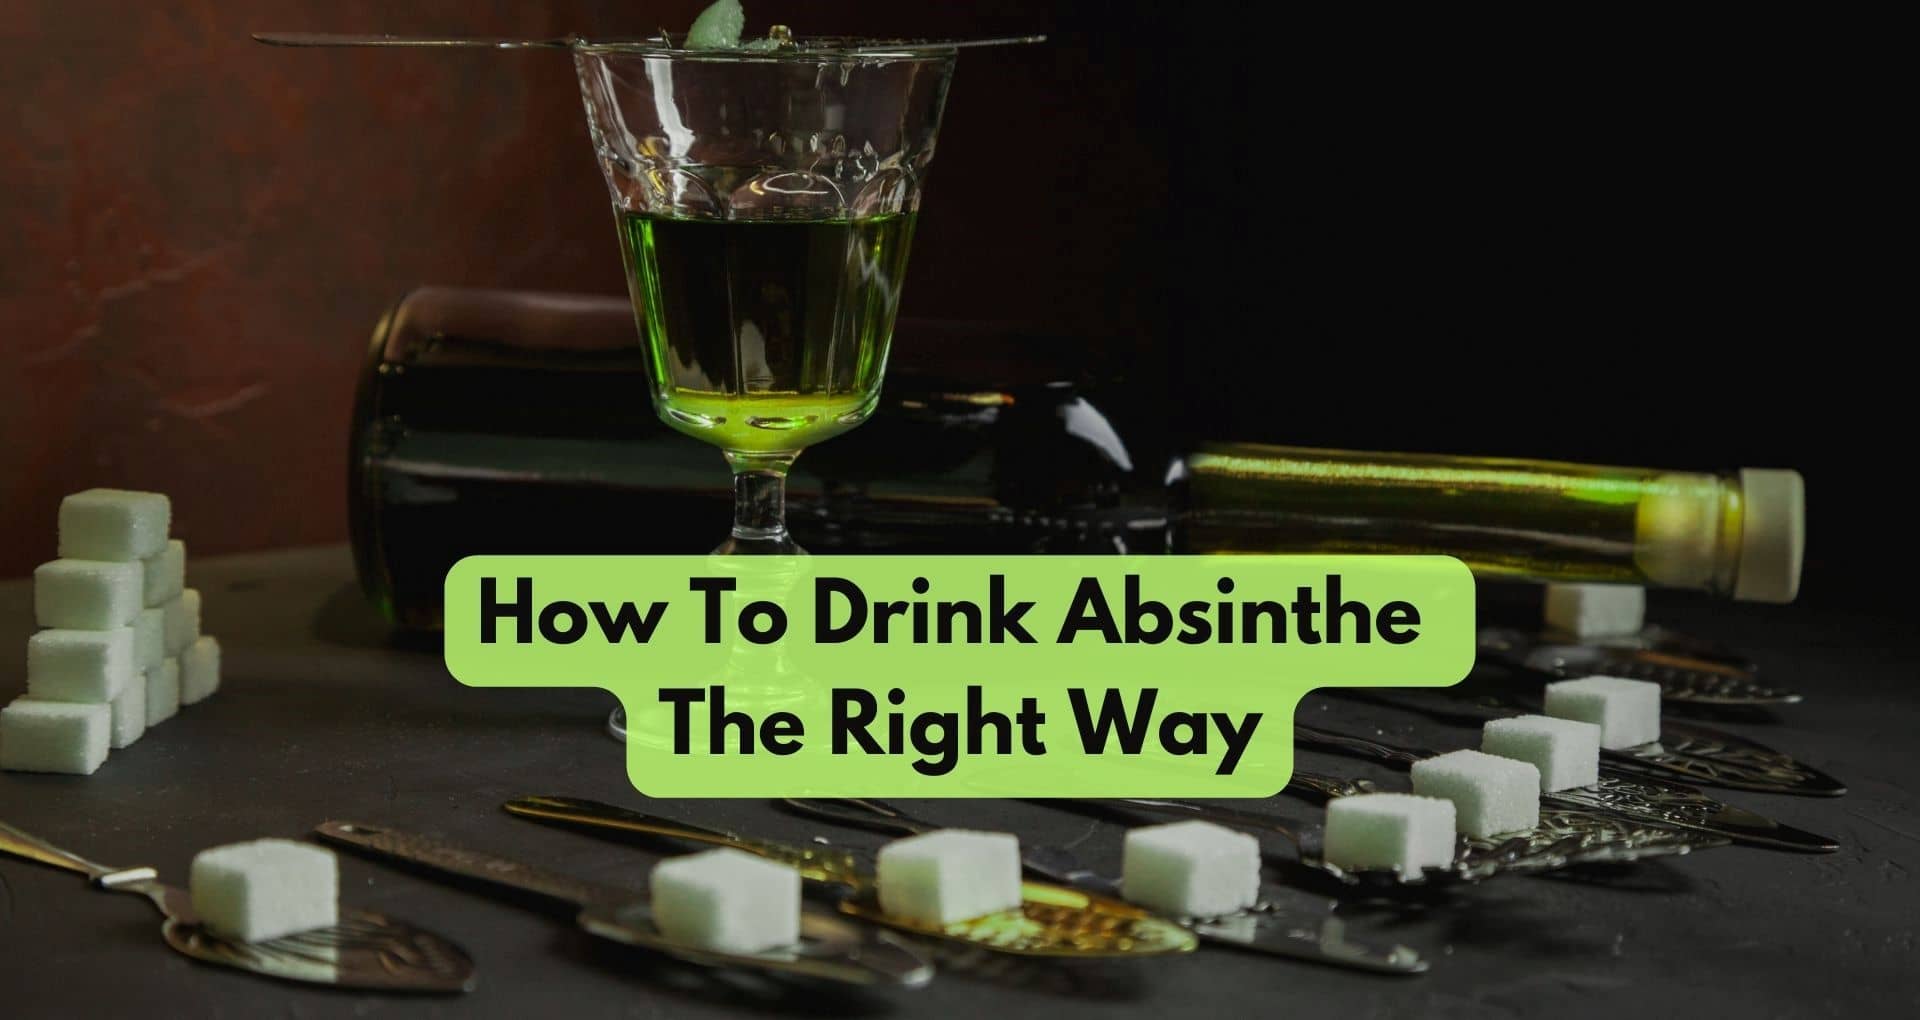 How To Drink Absinthe The Right Way